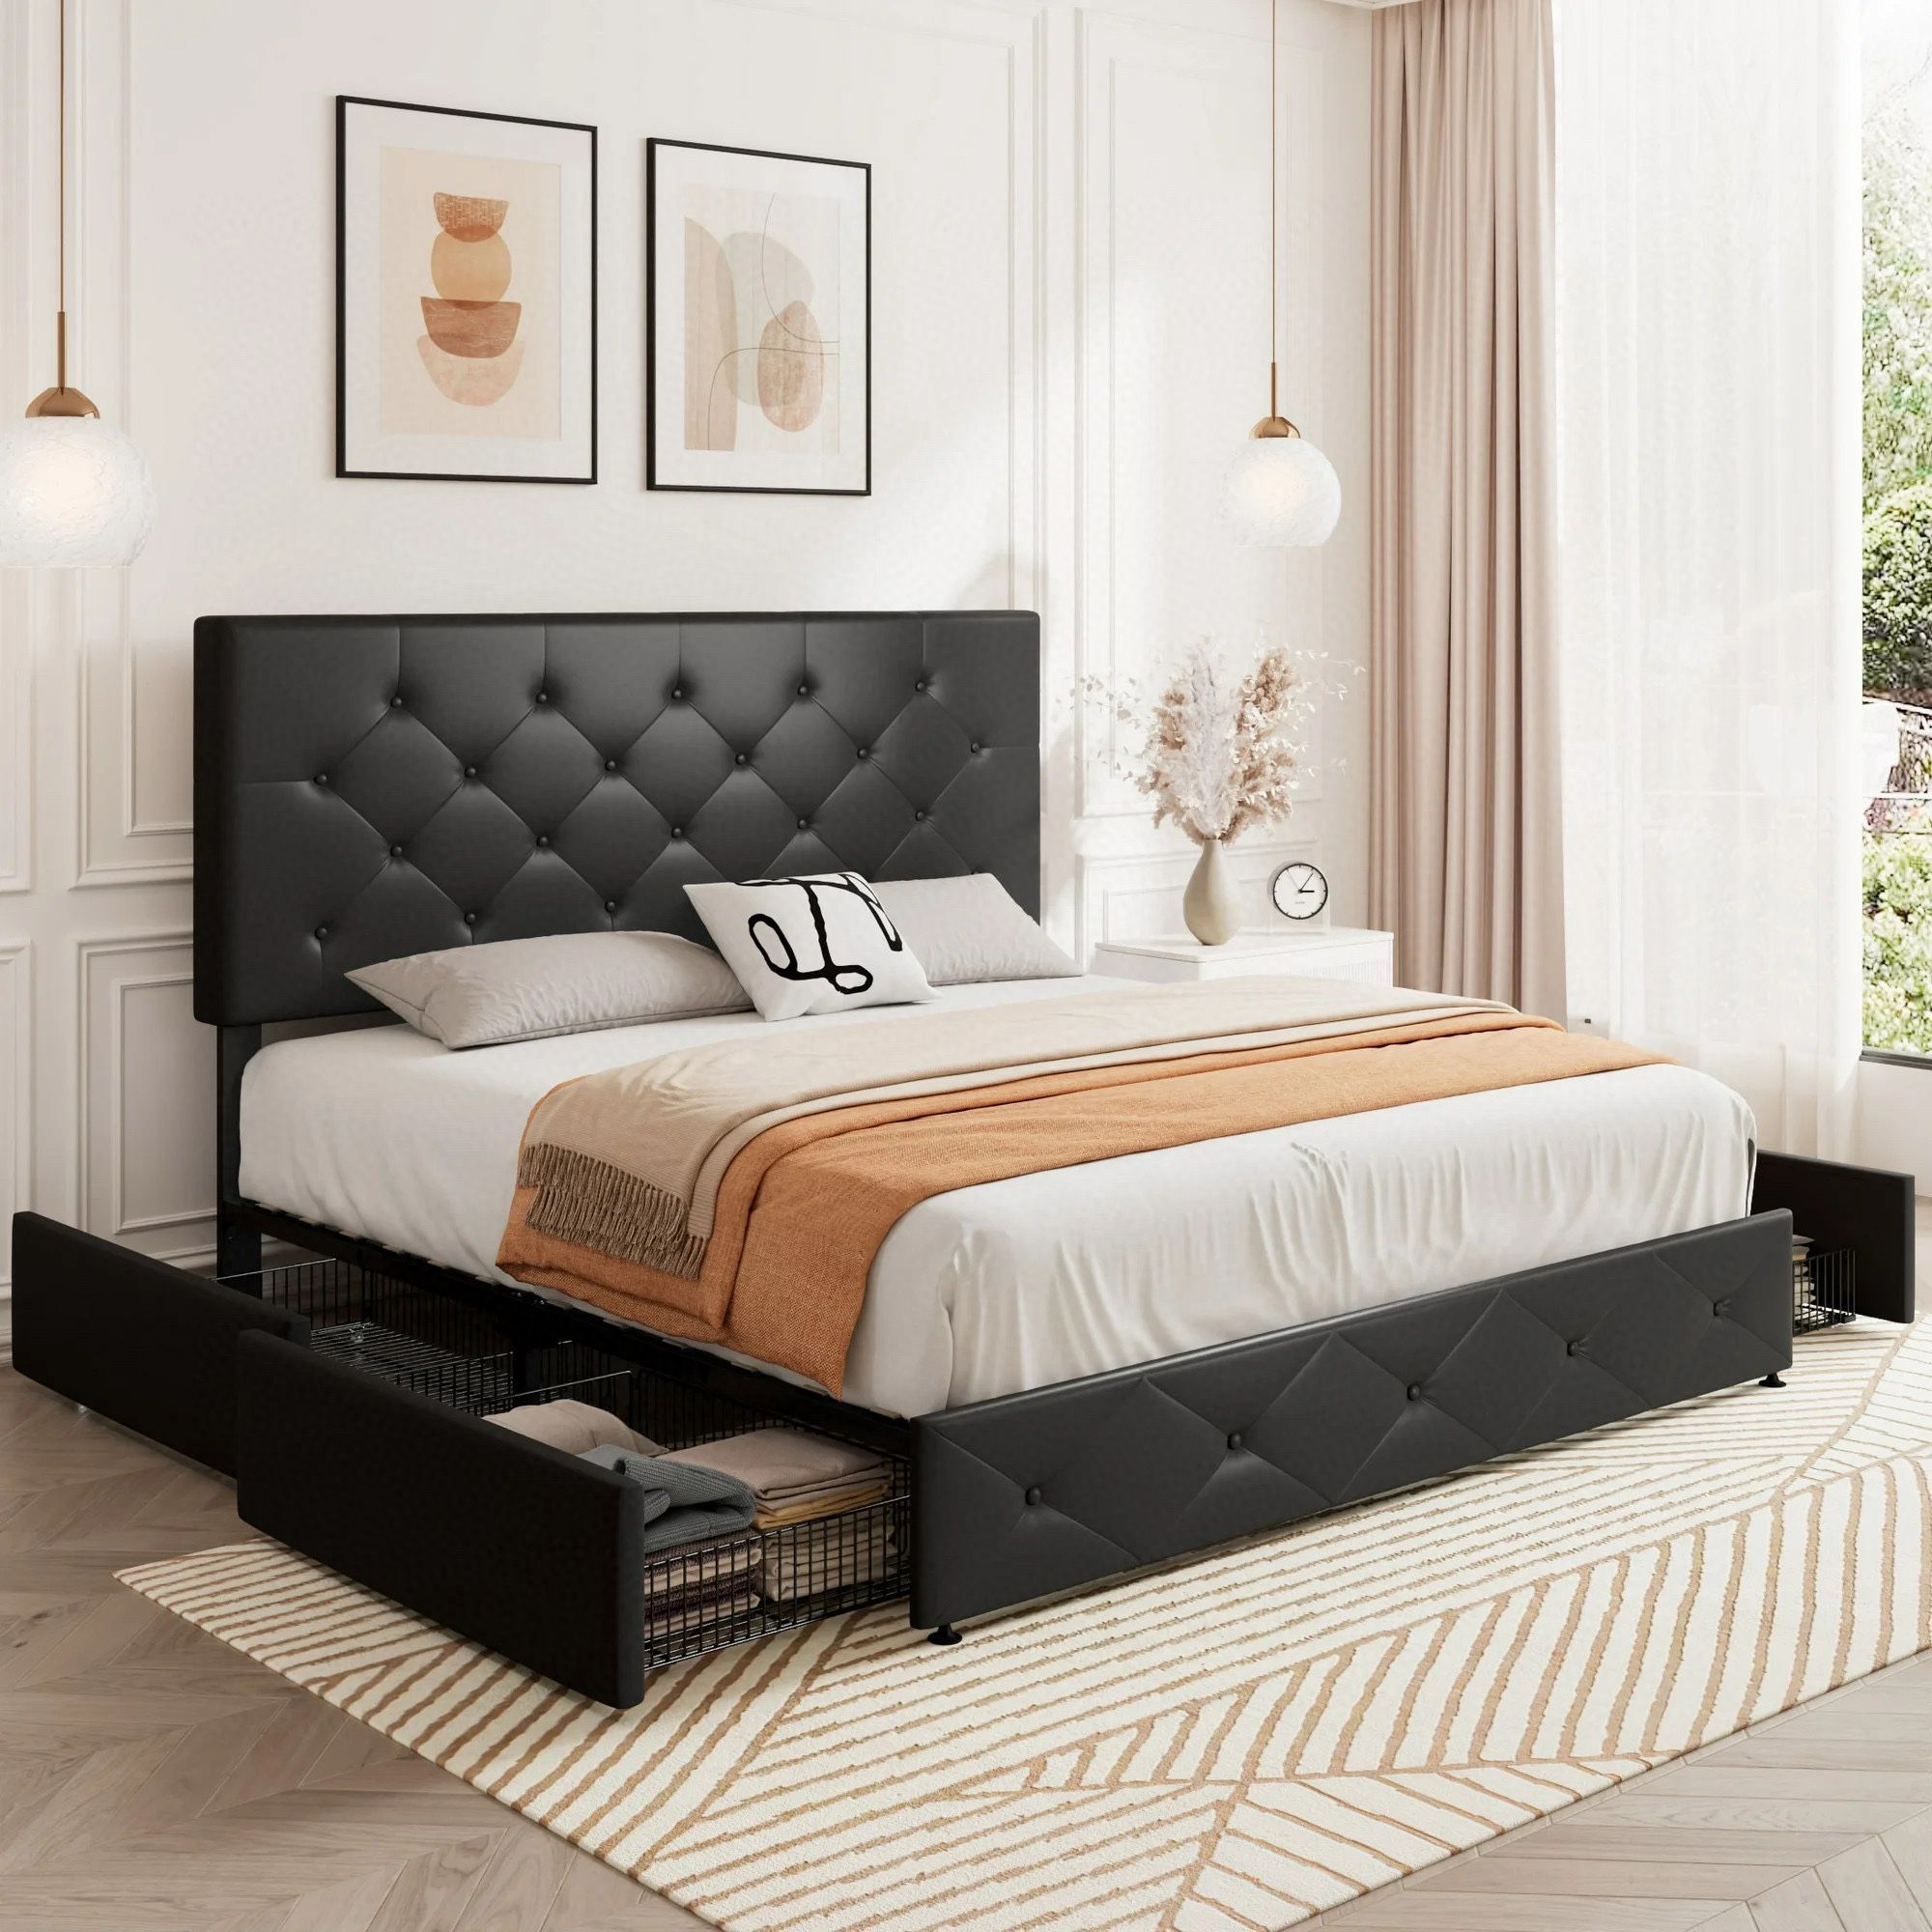 Faux Leather Storage Platform Bed Frame, queen Size Bed Frame with 4 Drawers, Upholstered with Adjustable Headboard, Black